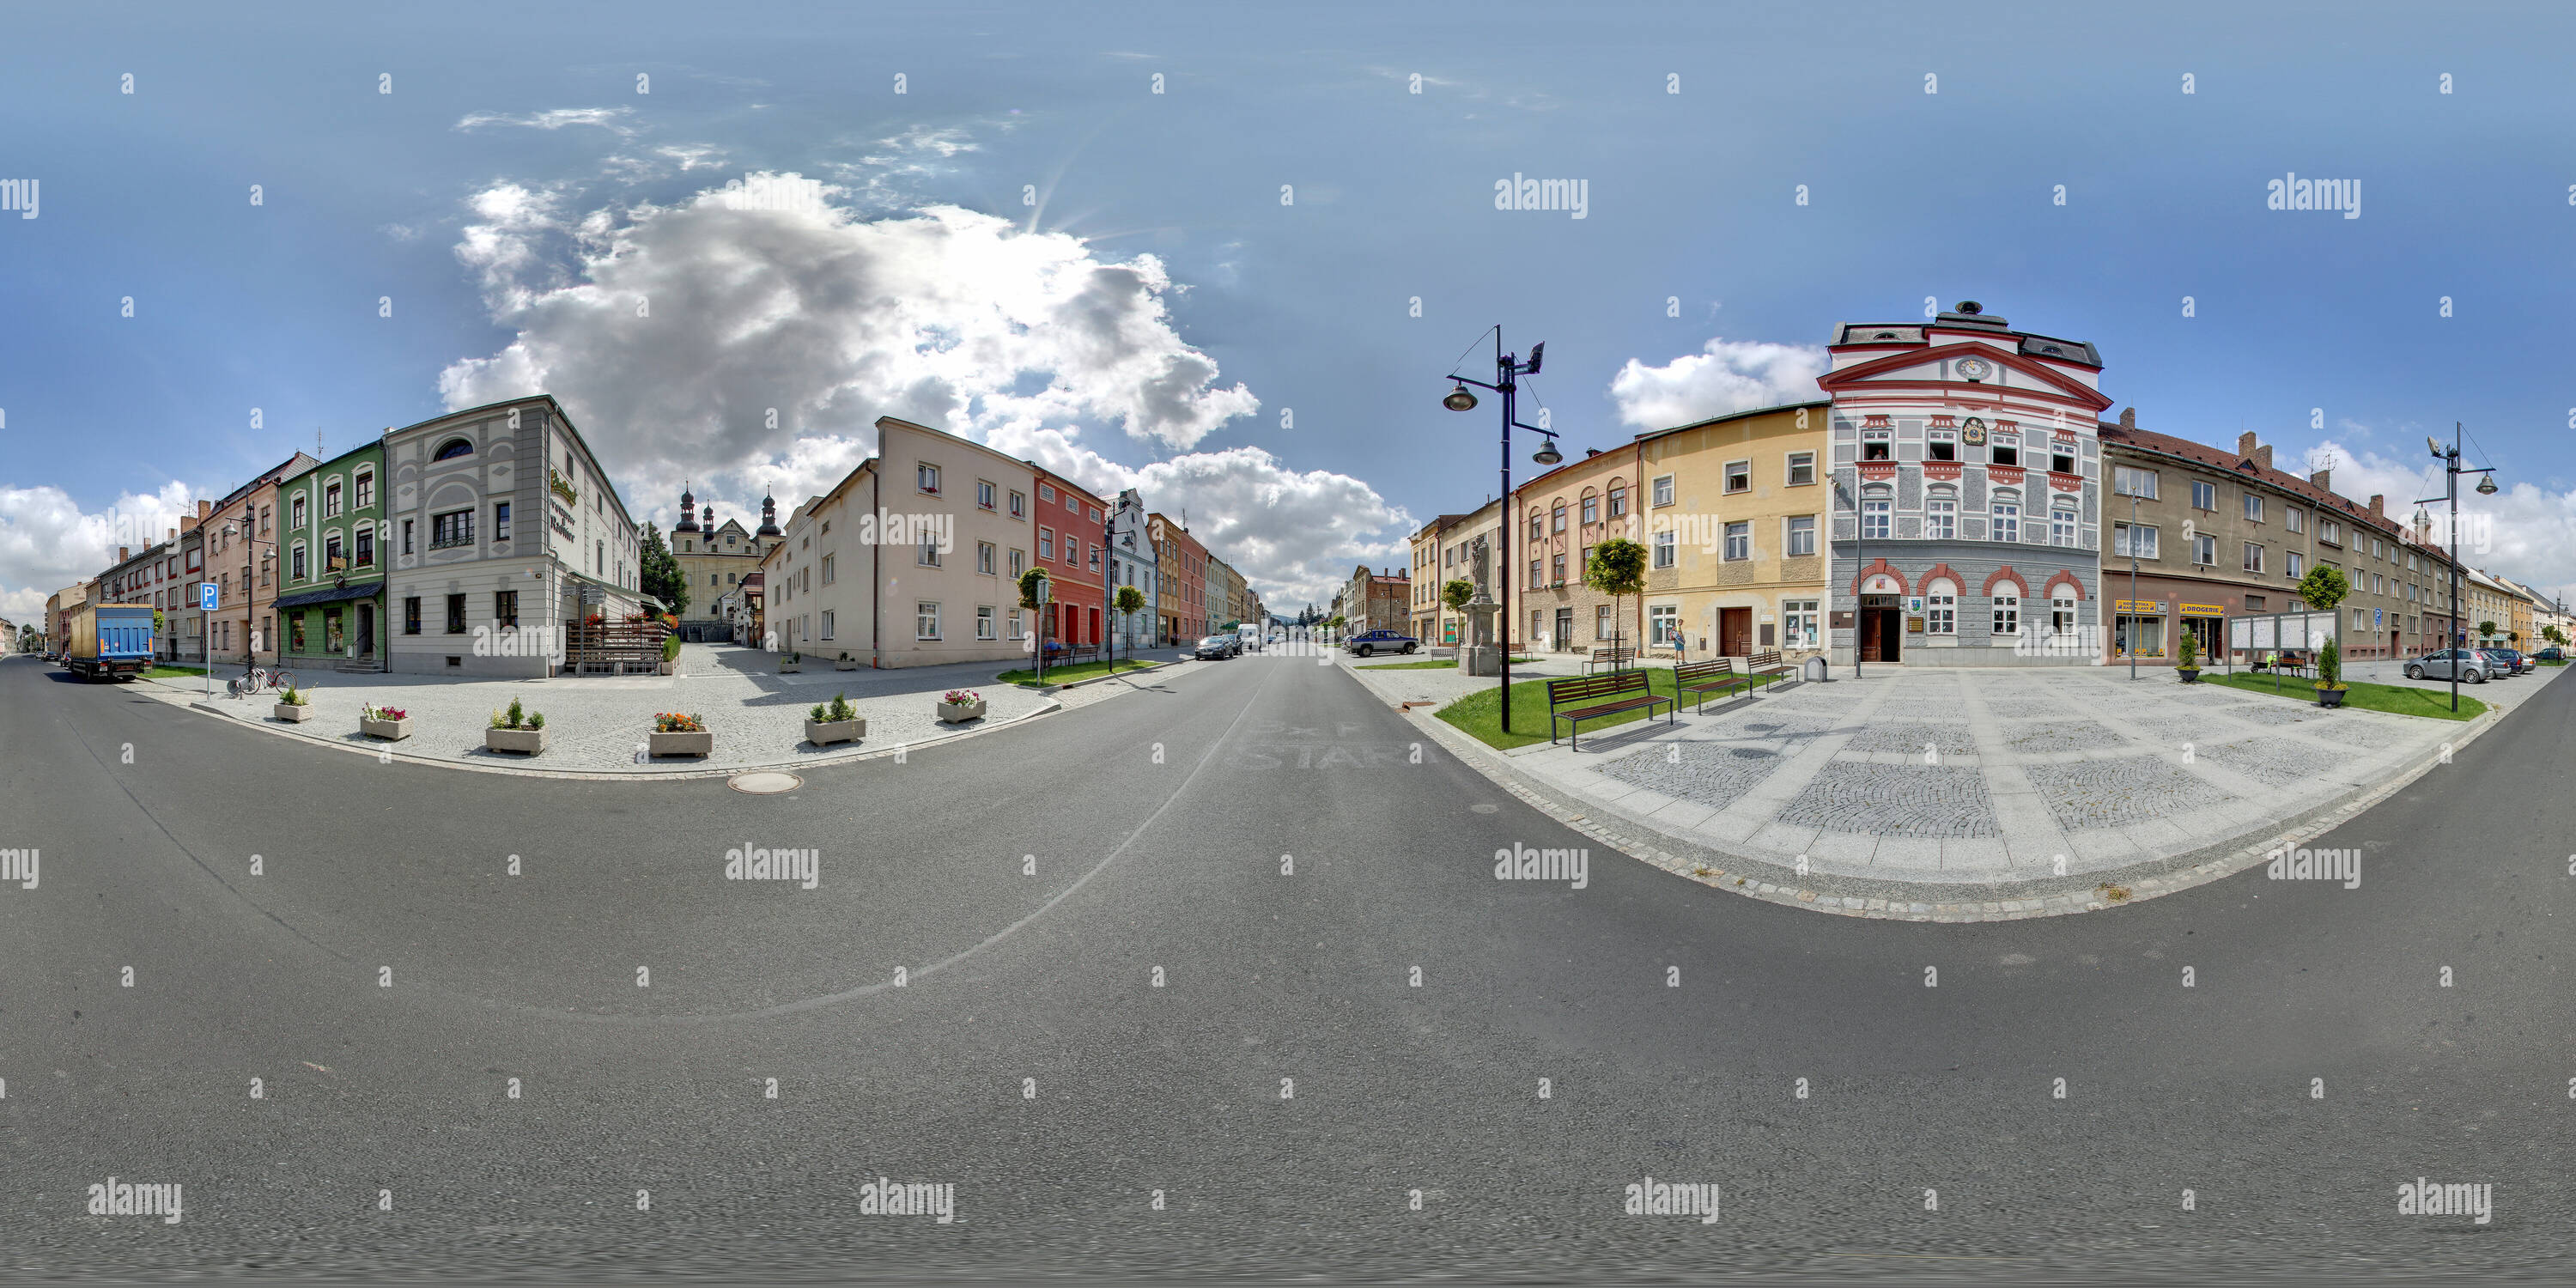 360 degree panoramic view of Zlaté Hory, town hall